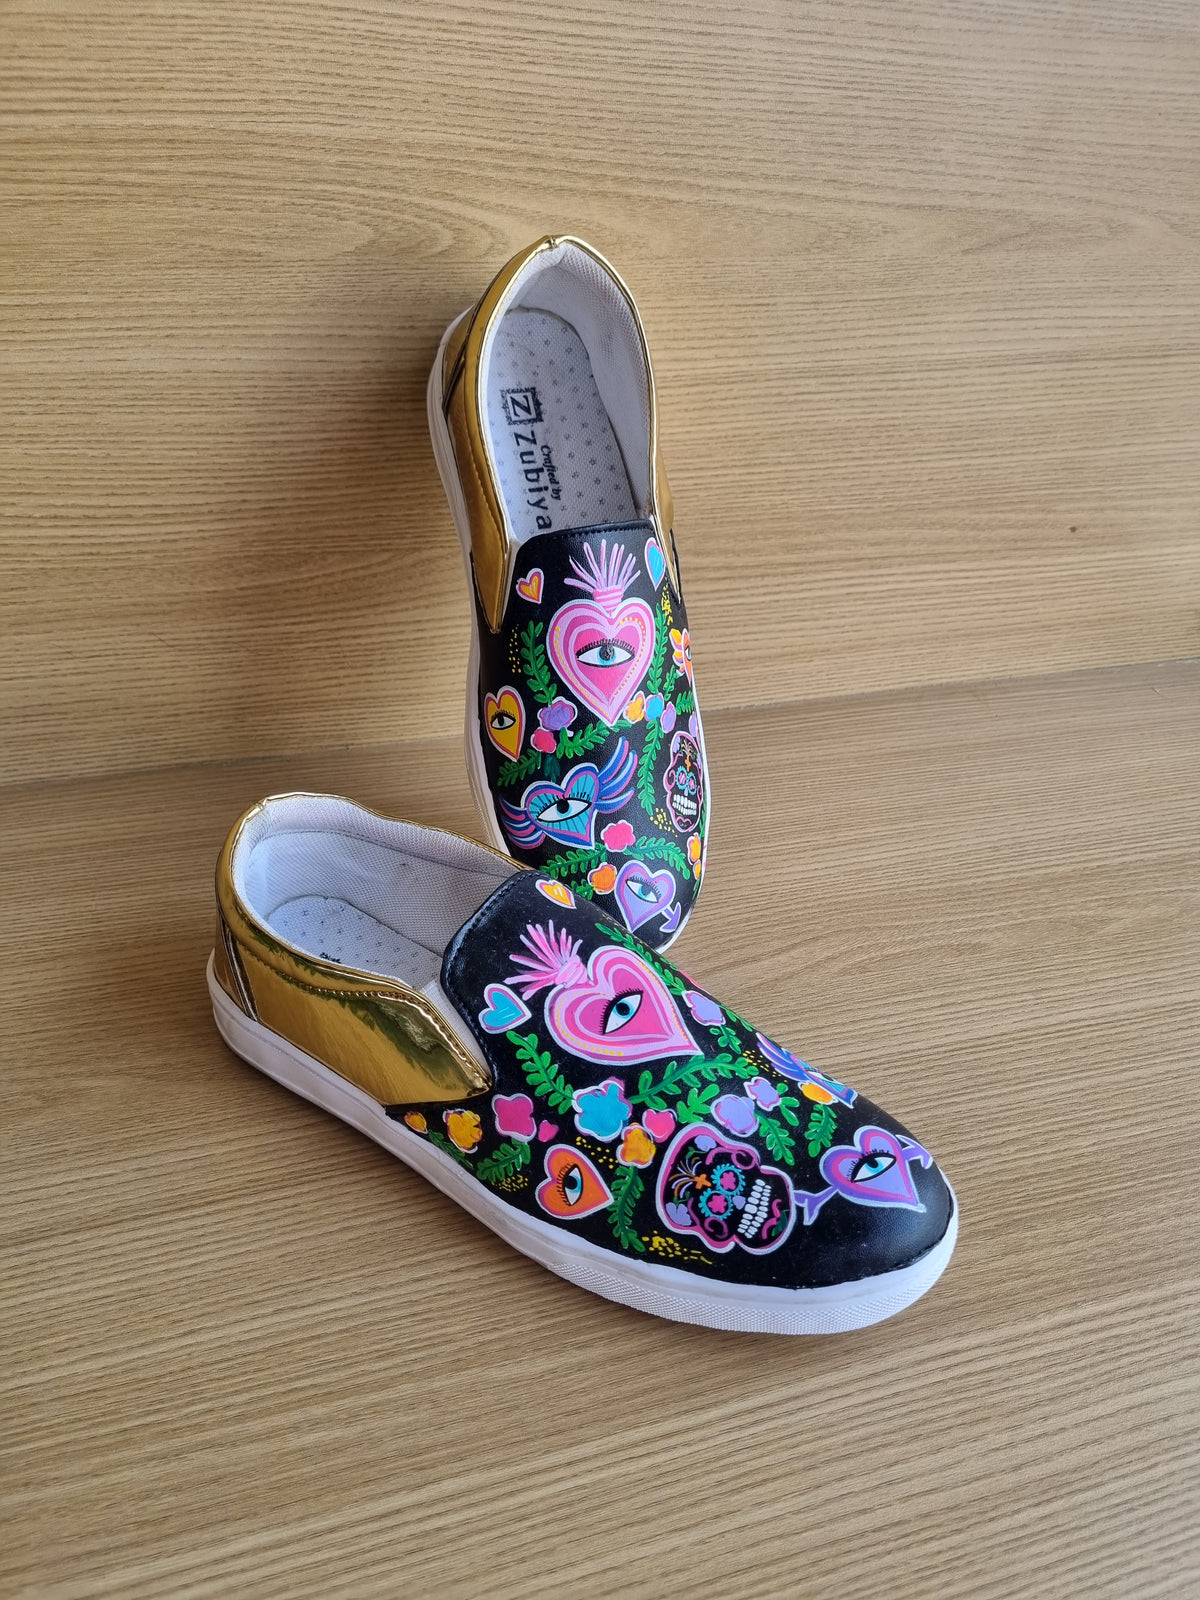 Mexicana shoes